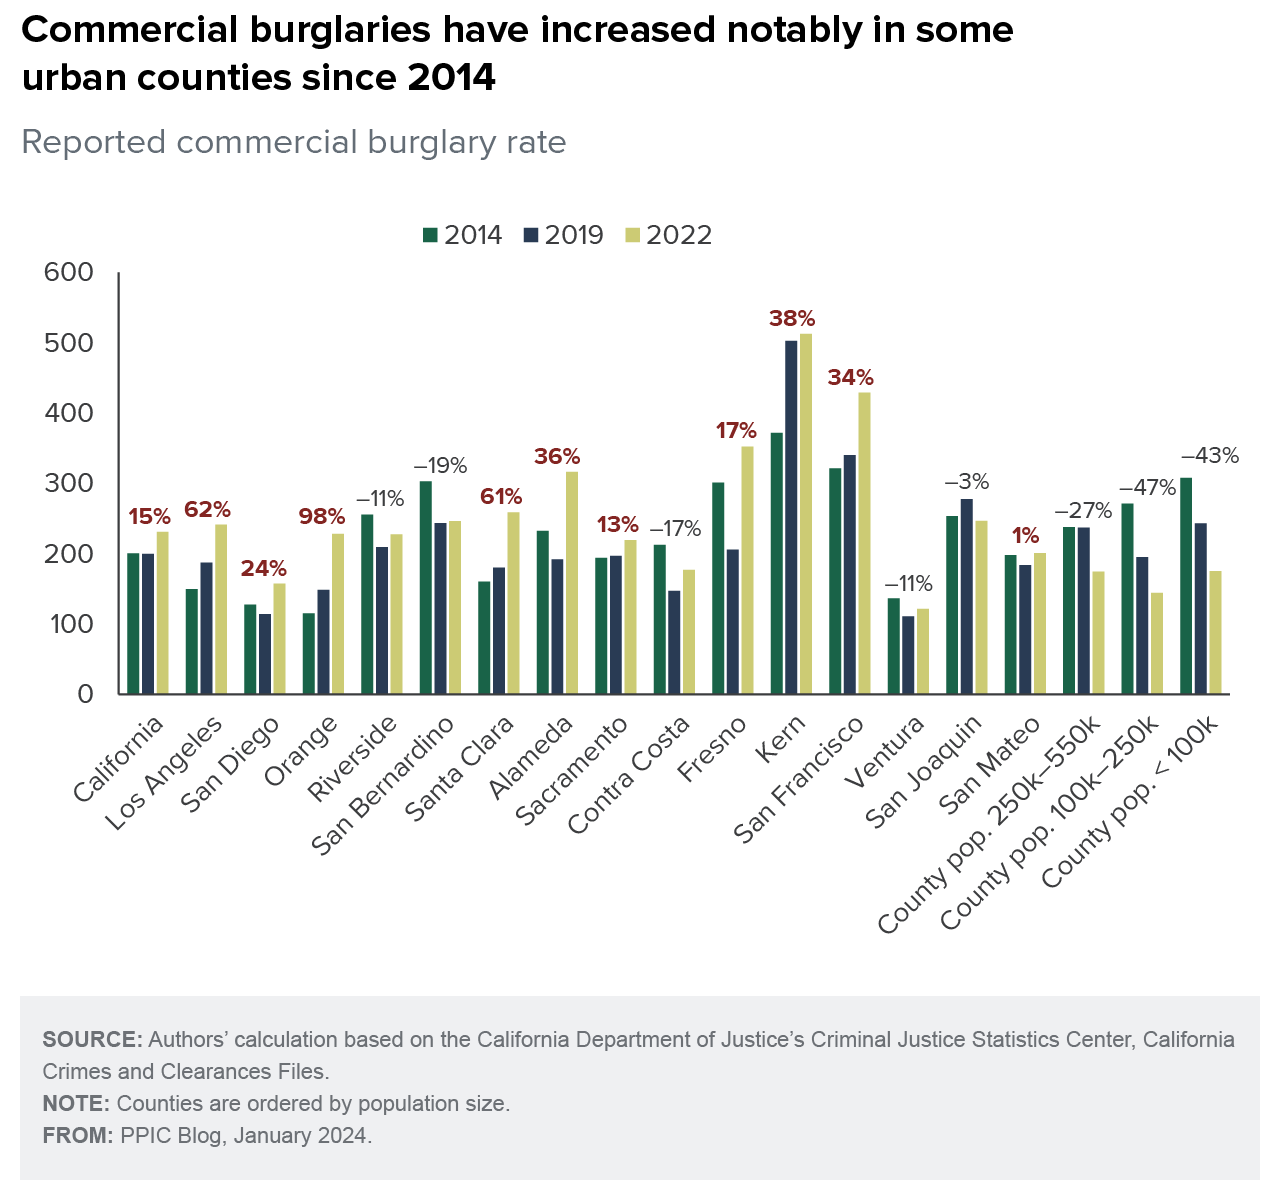 figure - Commercial burglaries have increased notably in some urban counties since 2014